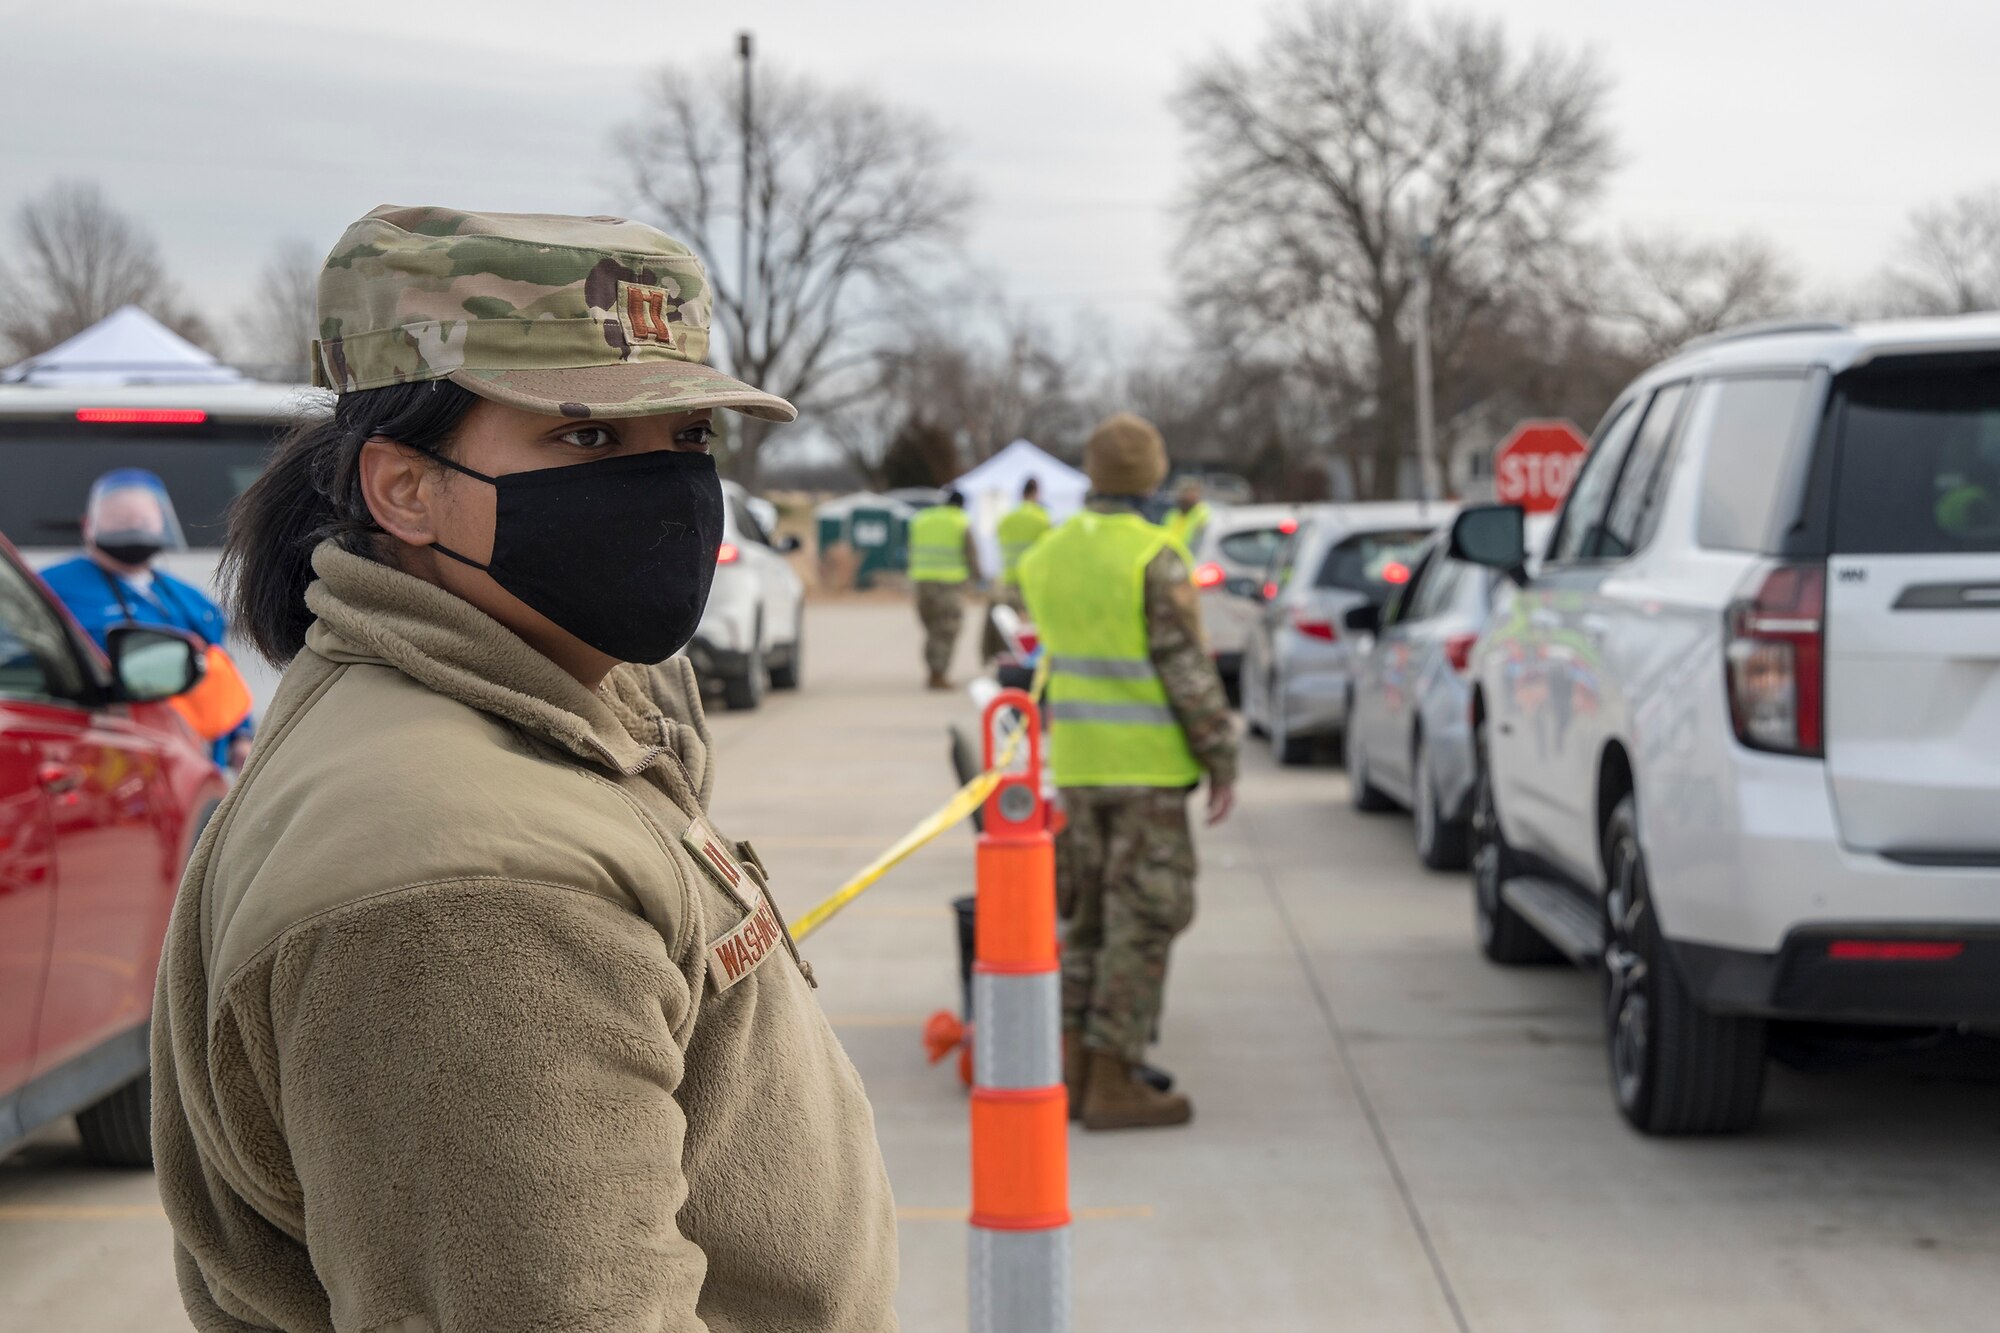 Capt. Adrienne Washington, a nurse with the 131st Medical Group, surveys a line of cars during a mass vaccination event February 5, 2021, in Clinton, Missouri. Officials expect to vaccinate about 2000 citizens as part of the State of Missouri’s overall COVID-19 vaccination plan. (U.S. Air National Guard photo by Tech. Sgt. John E. Hillier)